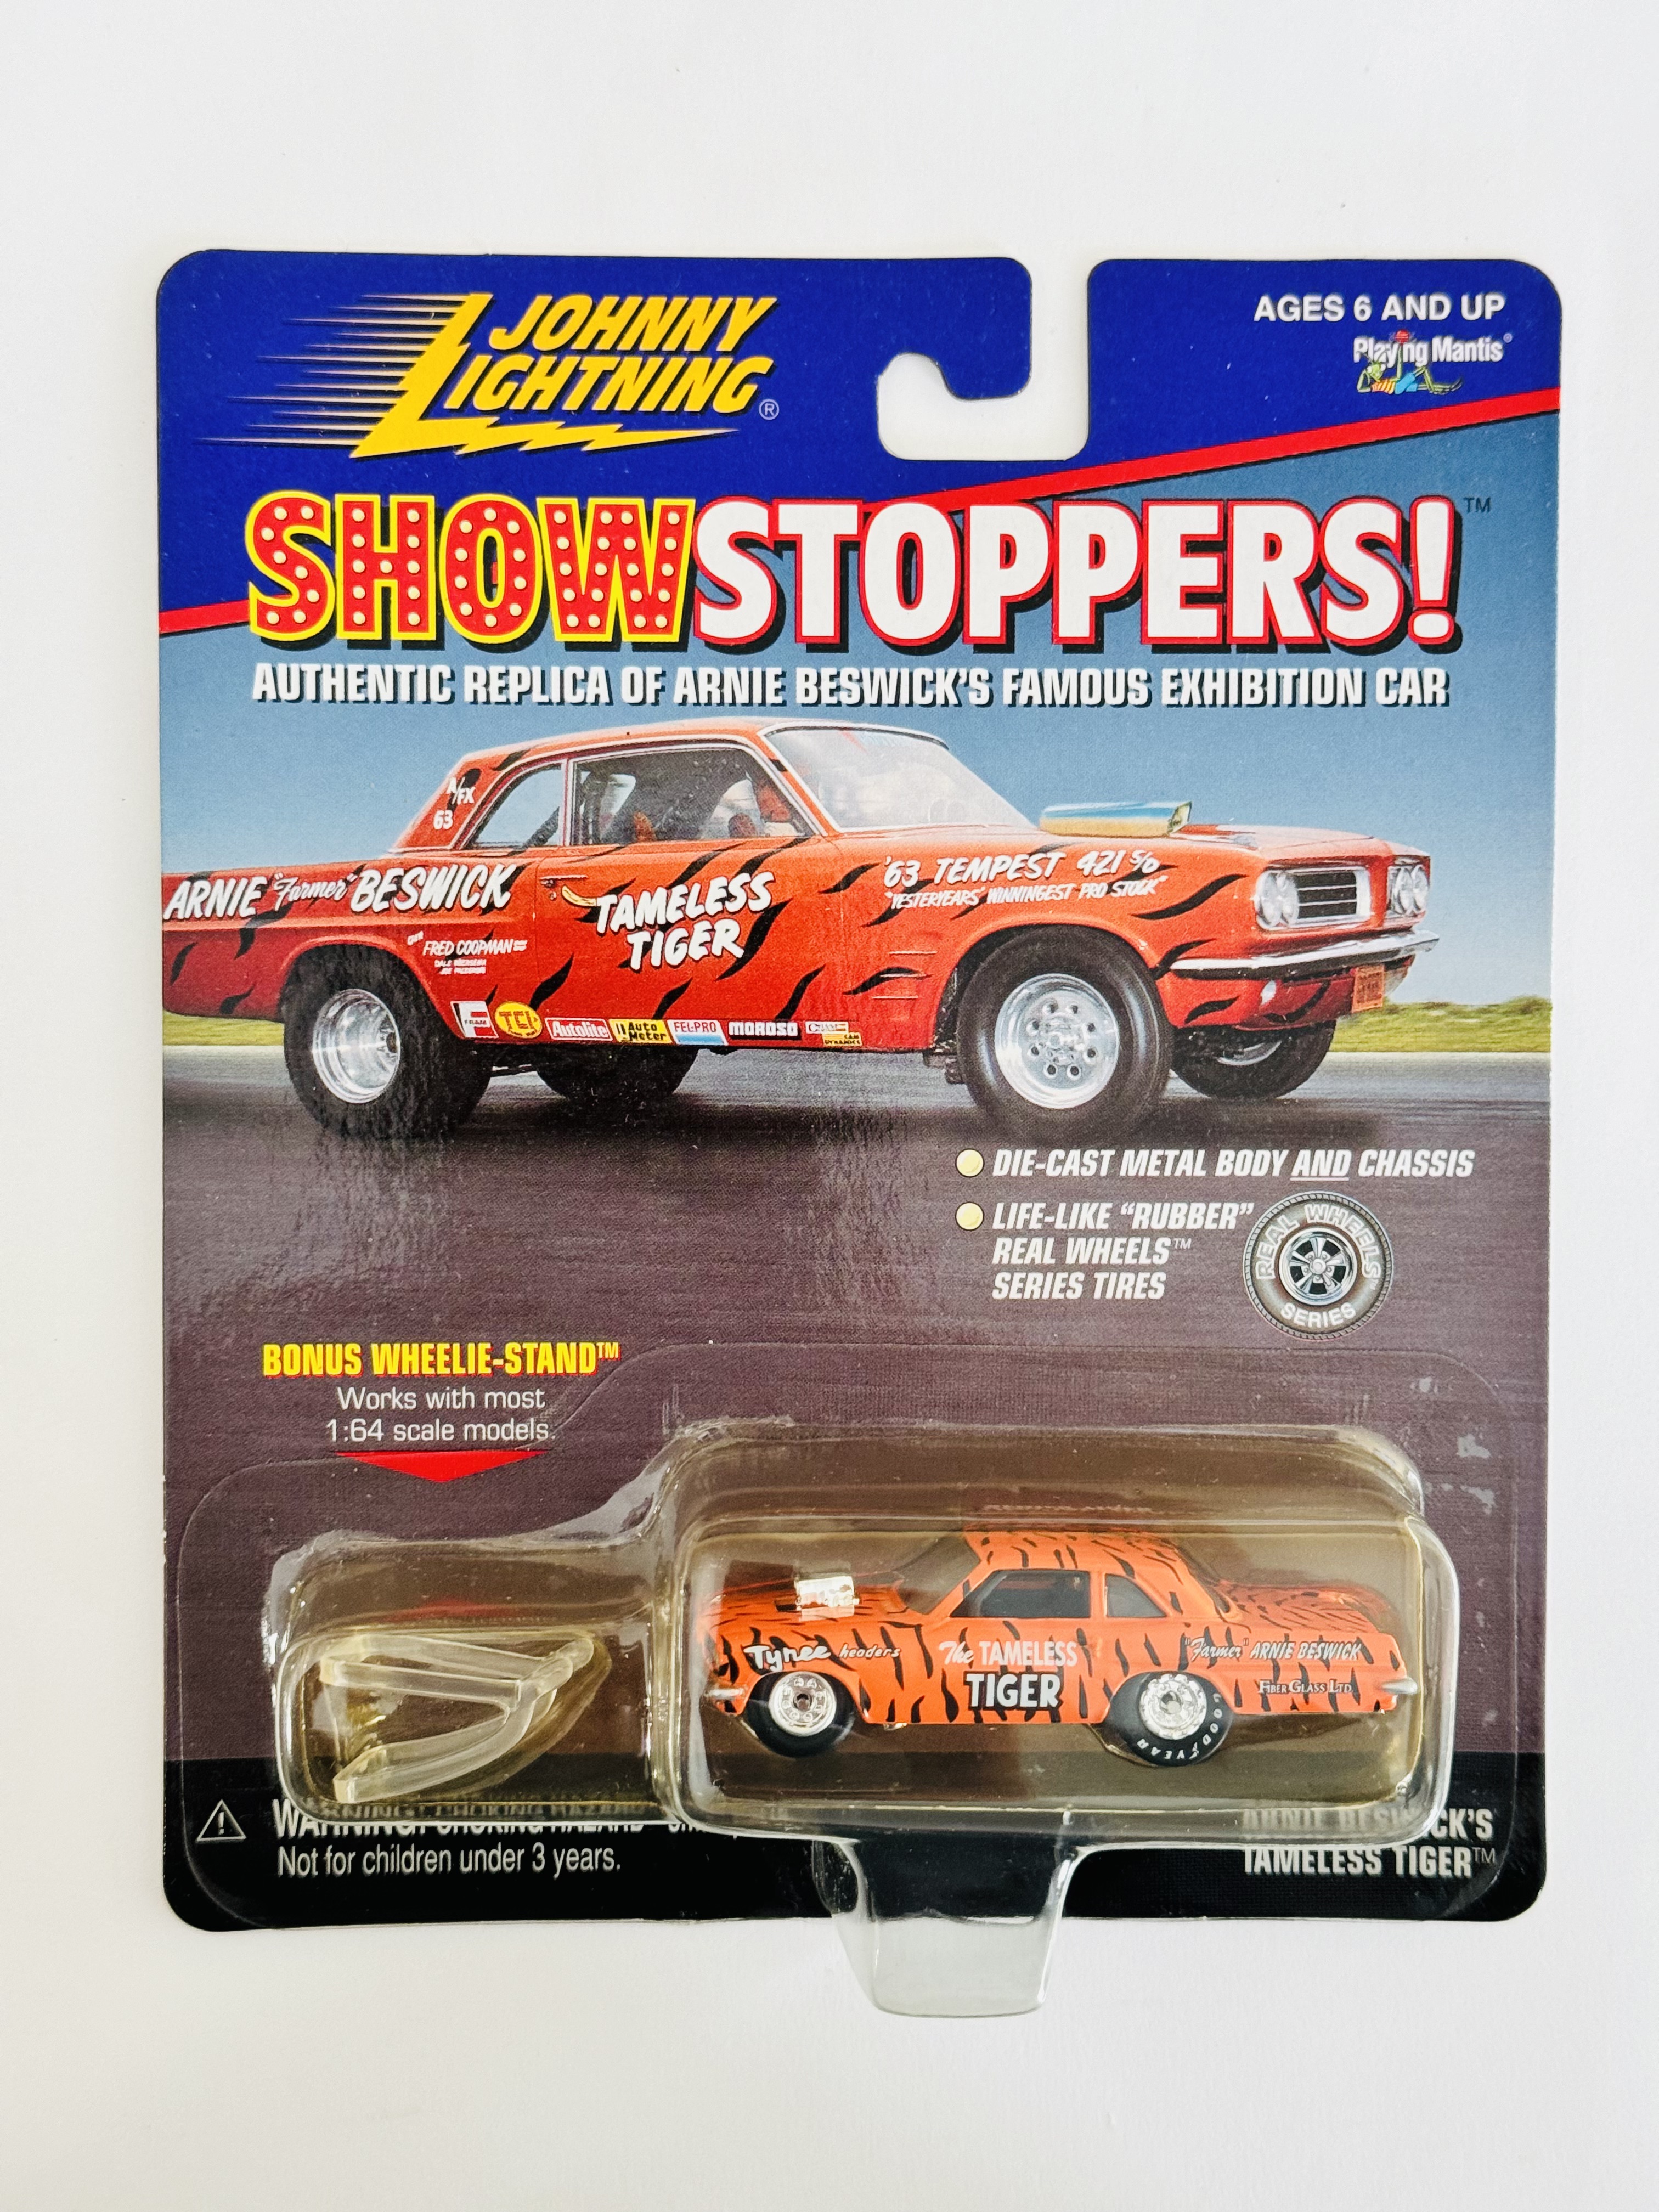 Johnny Lightning Show Stoppers Arnie Beswick's Tameless Tiger